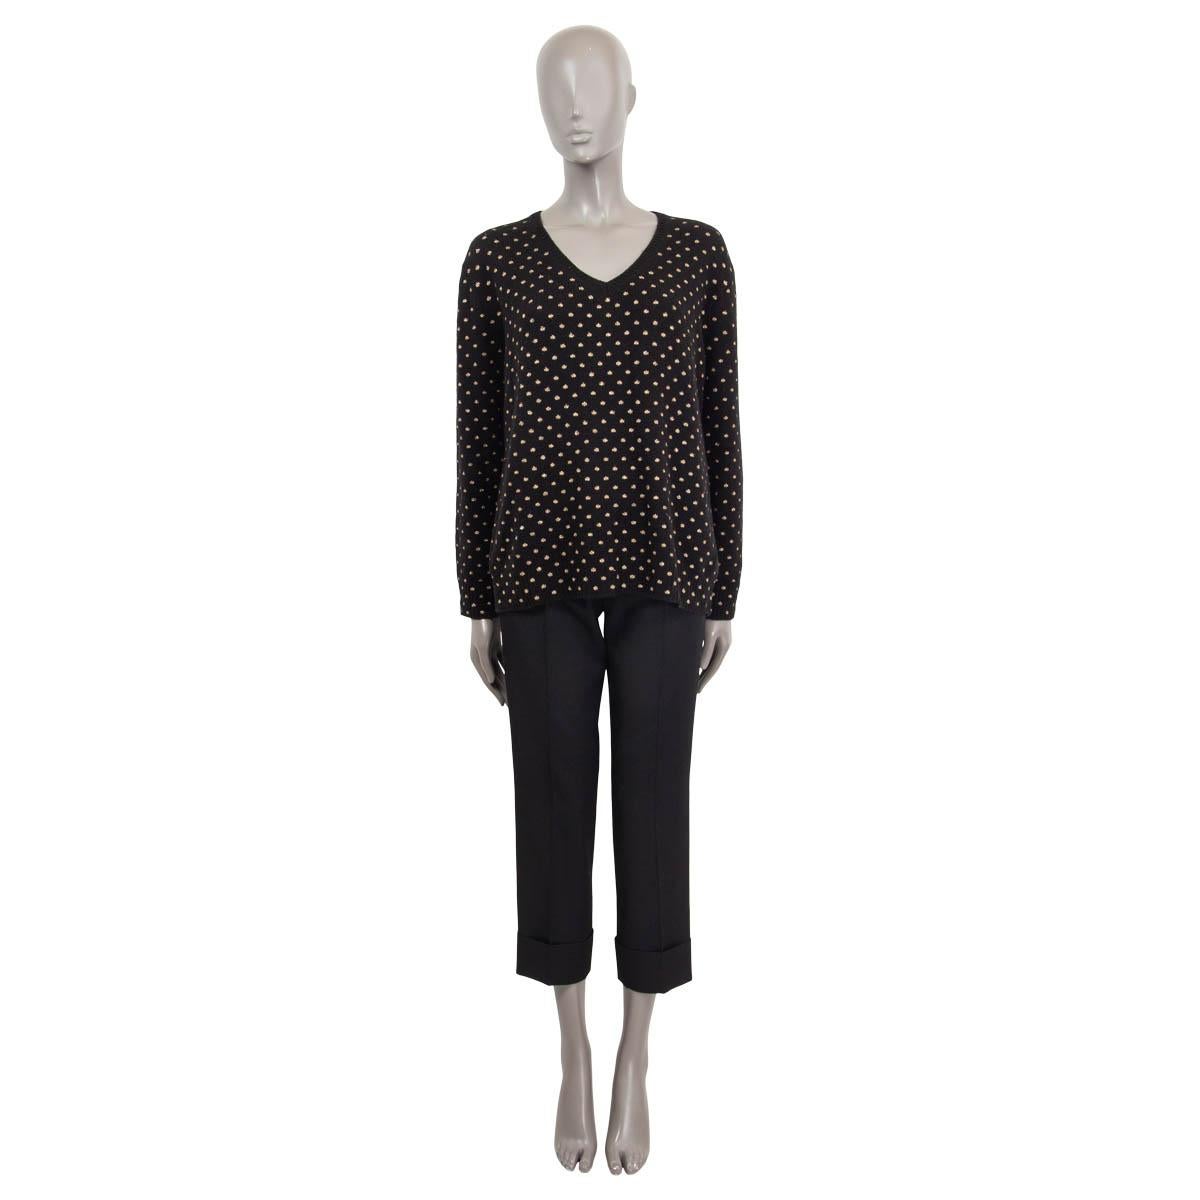 100% authentic Christian Dior sweater in black cashmere (100%) and polka dots in gold viscose (40%), polyester (15%), metal polyester (15%), polyamide (15%) and cupro (15%). Features long sleeves and a v-neck. Unlined. Has been worn and is in